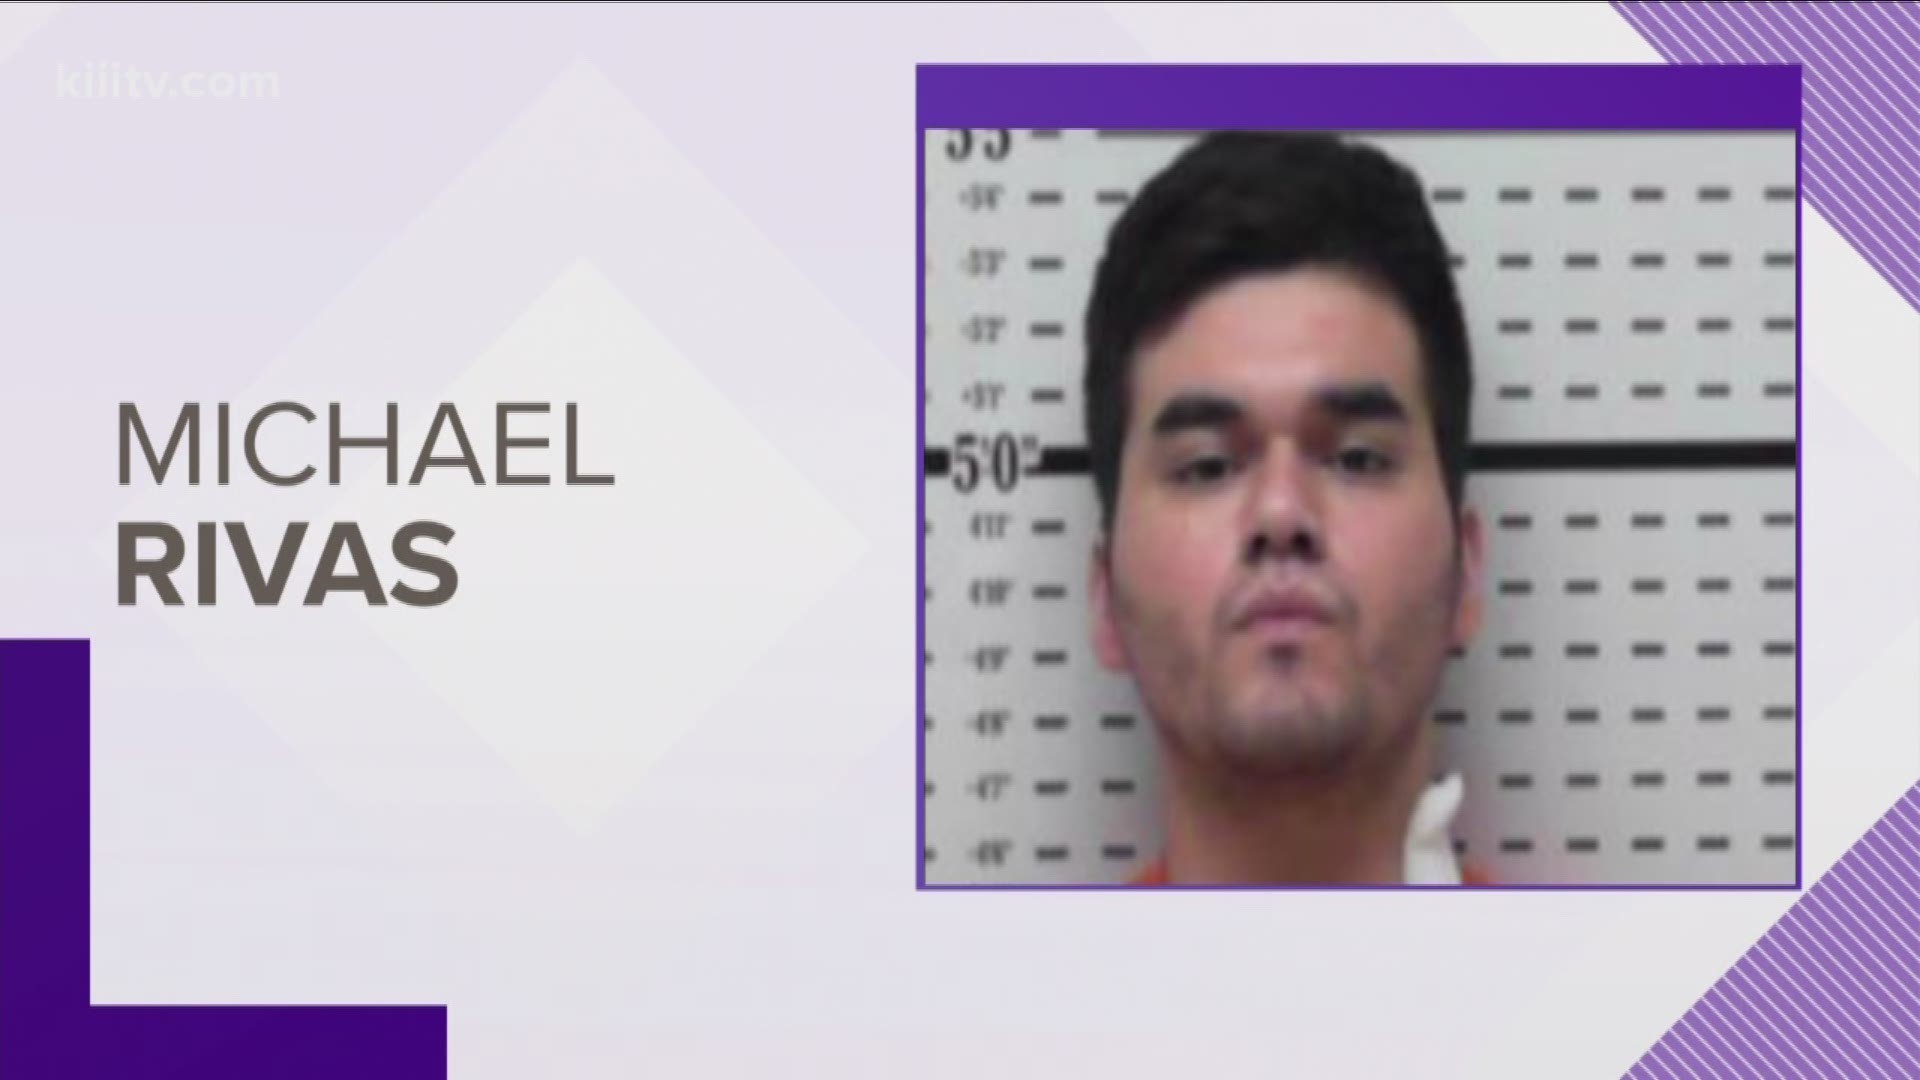 22-year-old Michael Rivas was arrested Tuesday after police said he fired several rounds at officers during a six-hour standoff.